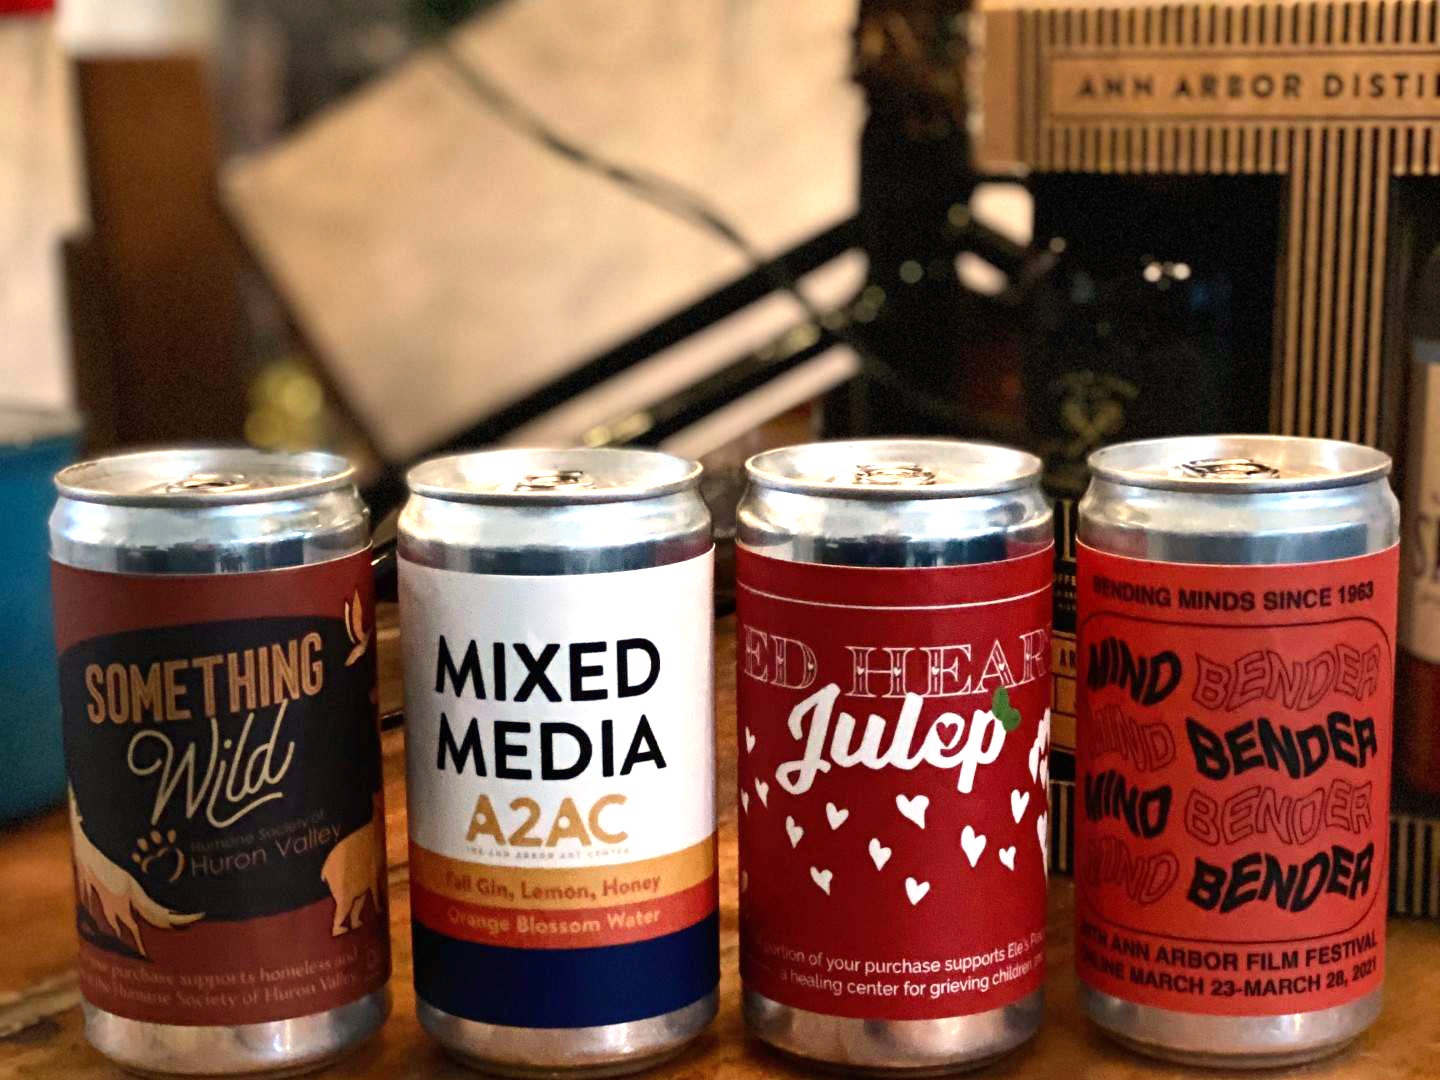 Ann Arbor Distilling Company introduces new collaborative cocktails with local organizations